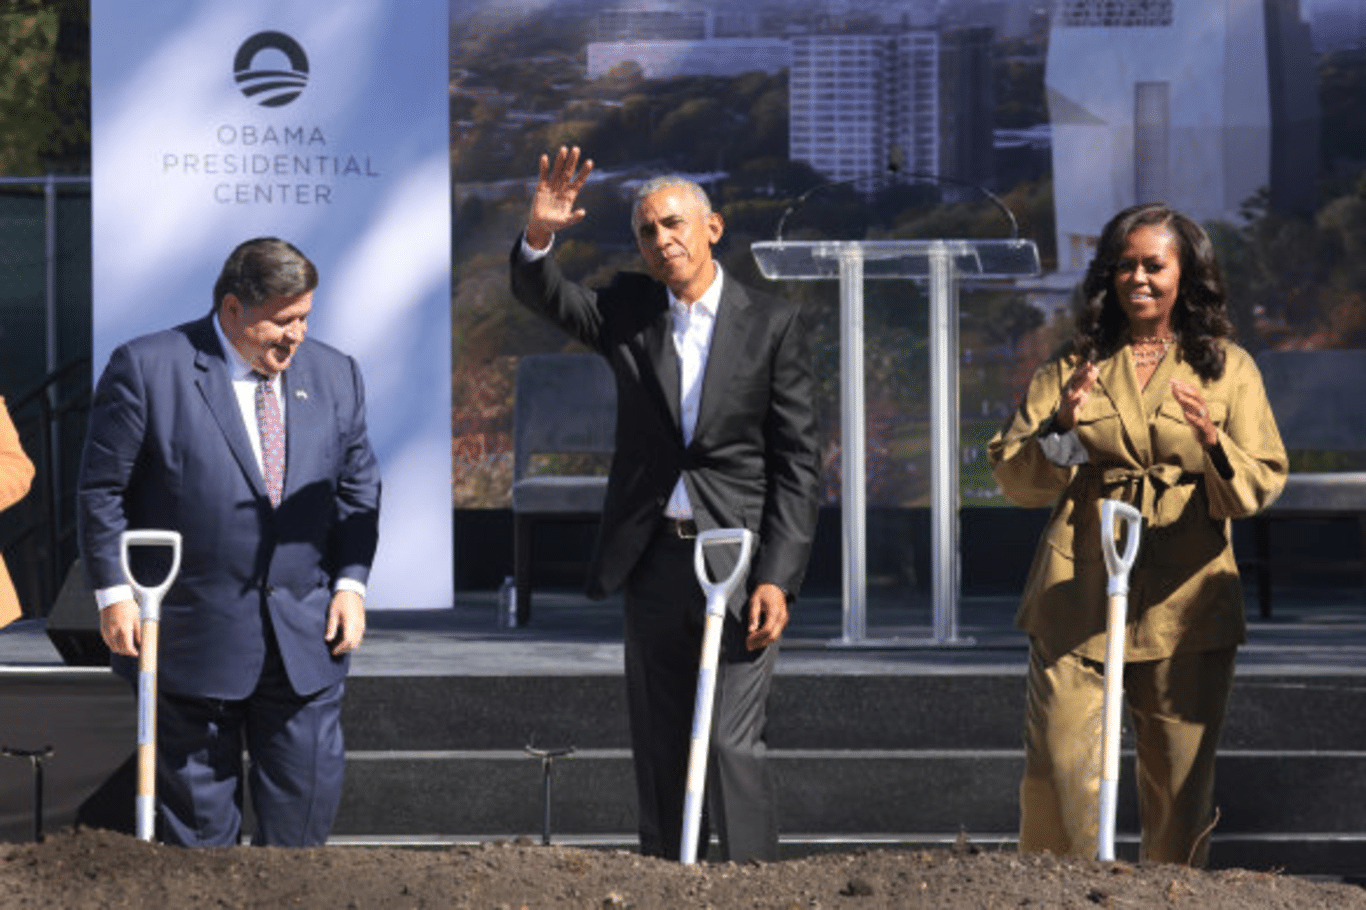 Obama's Presidential Centre: A New Kind of Attraction